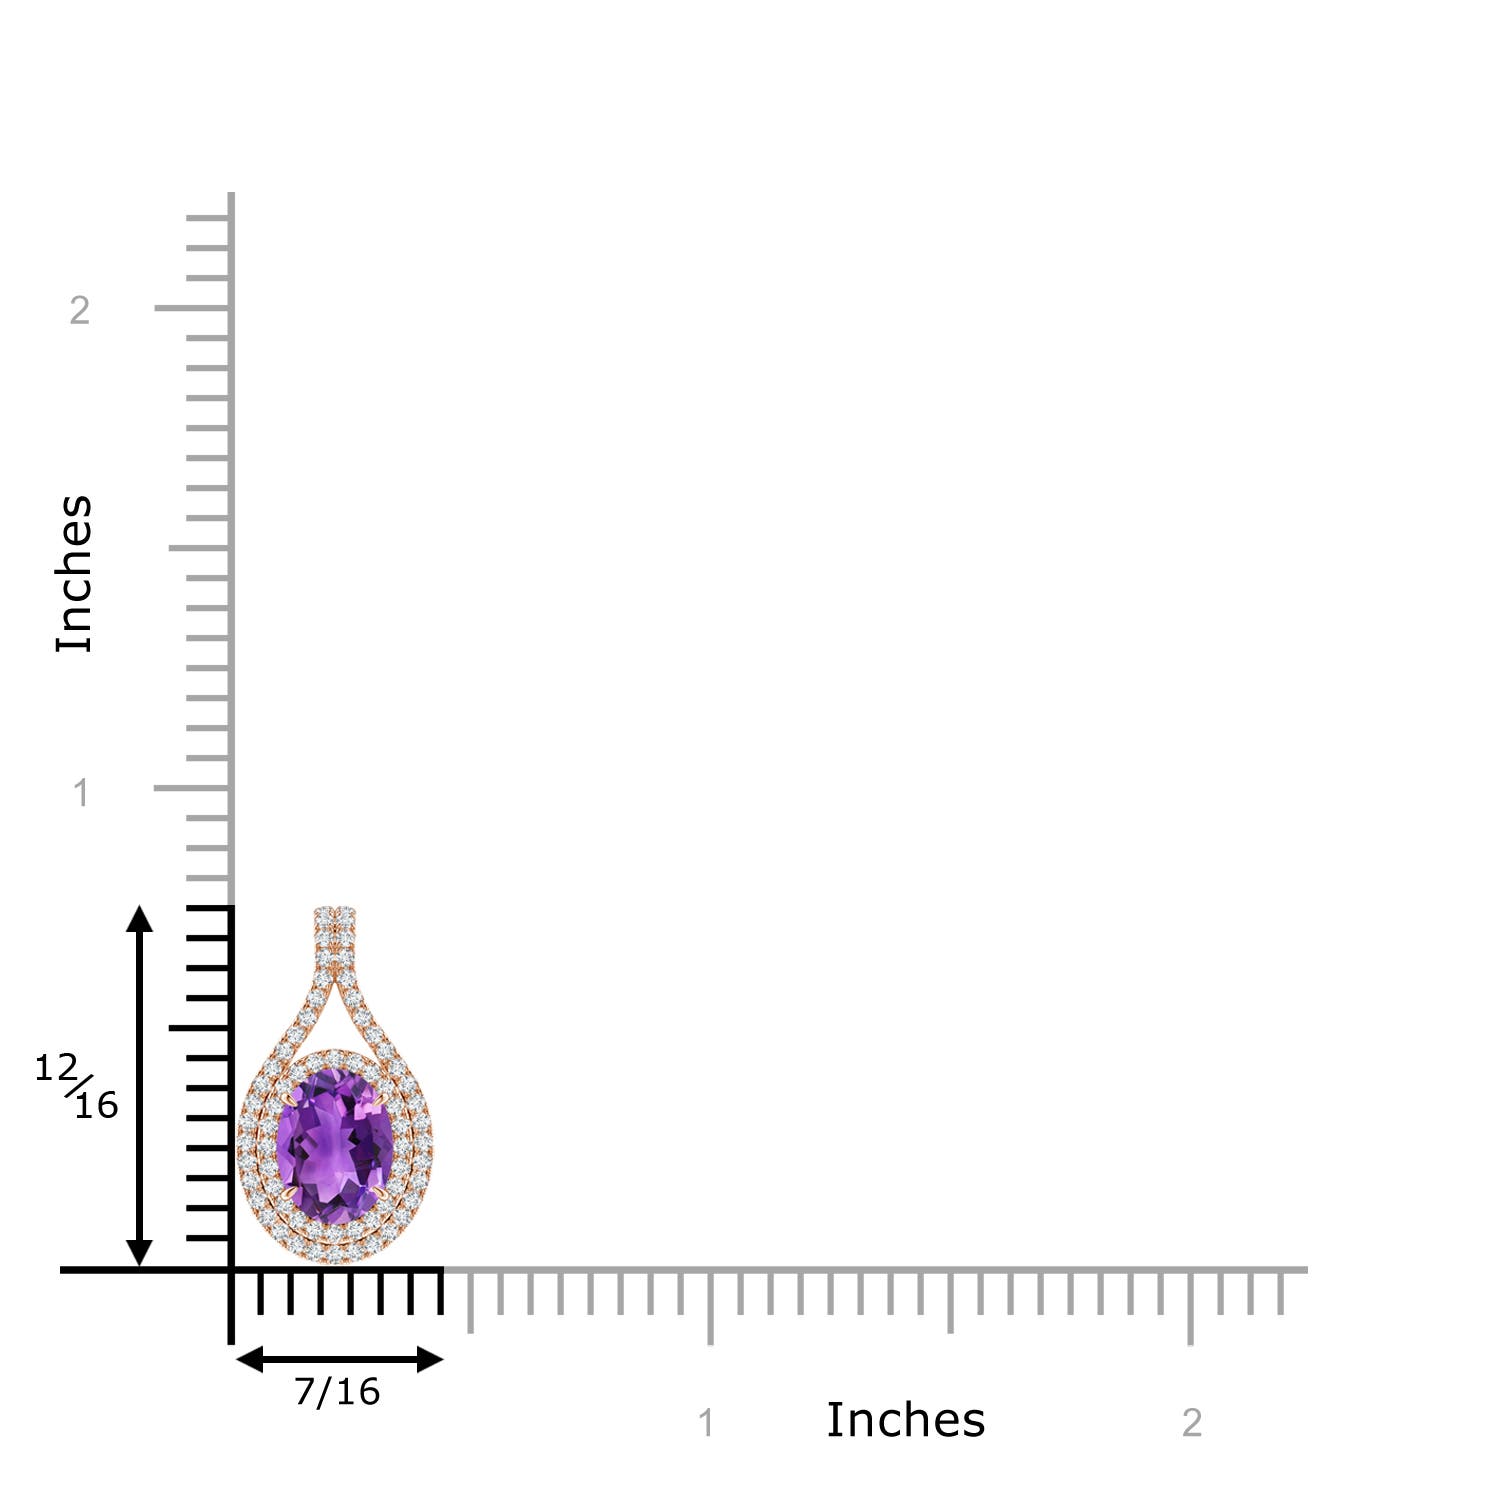 AAA - Amethyst / 1.45 CT / 14 KT Rose Gold